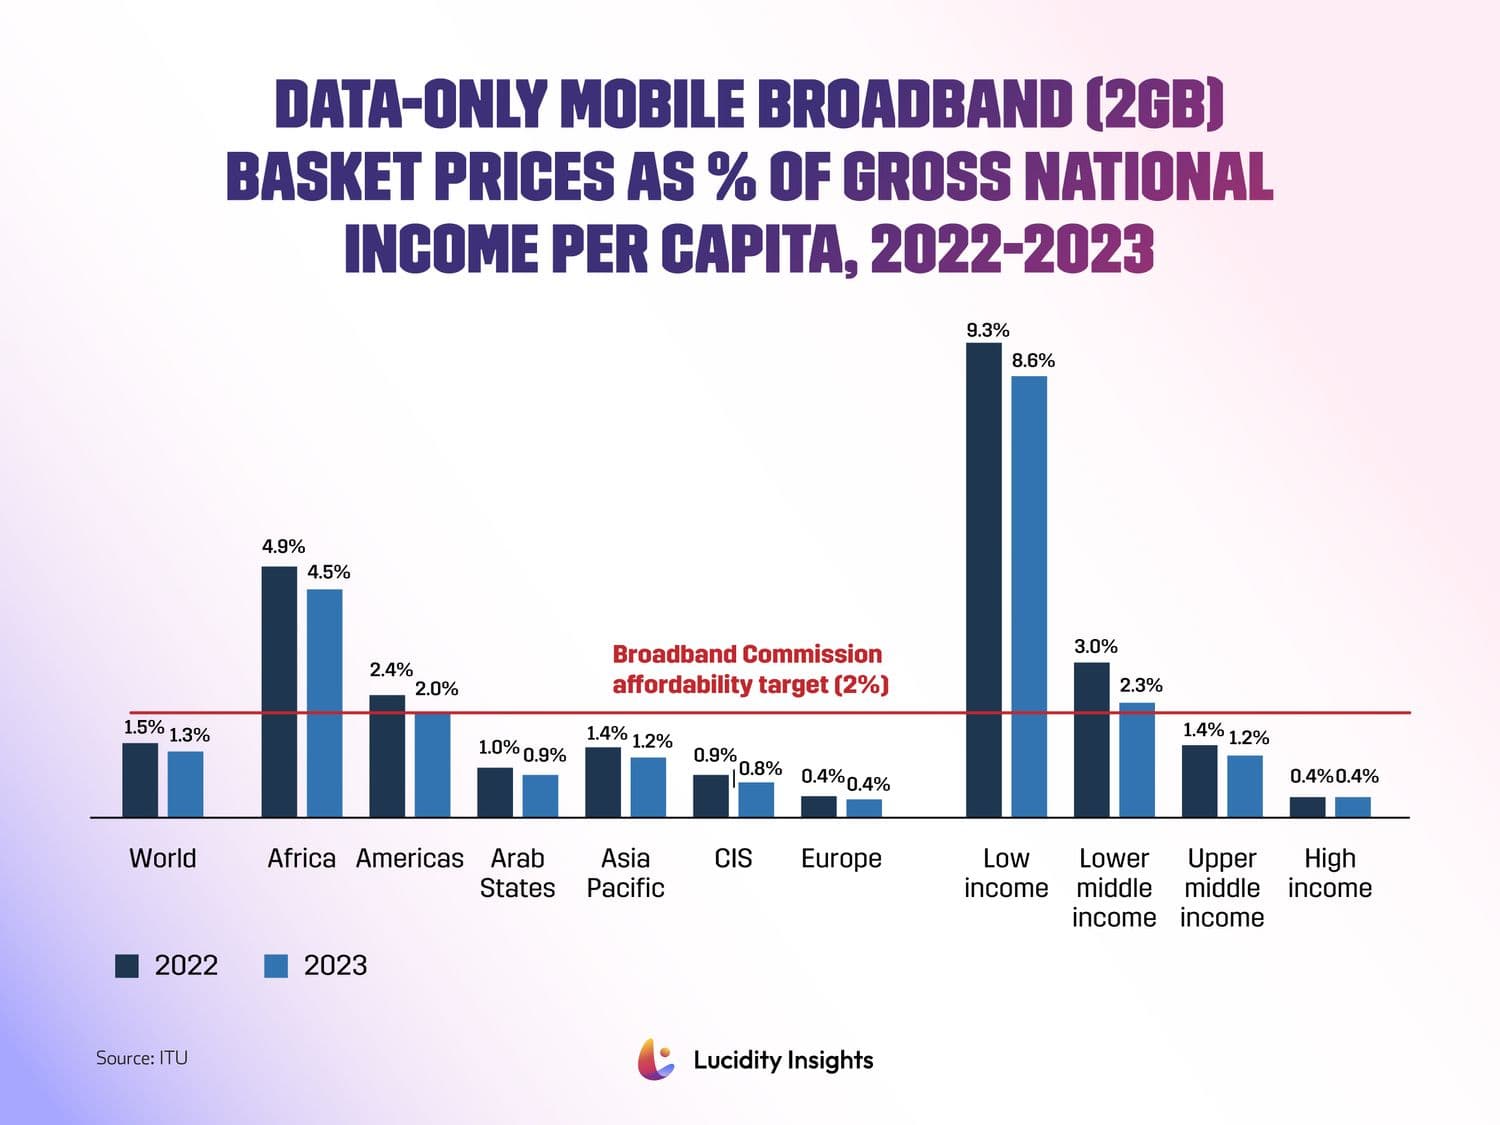 Mobile Broadband (2GB) Prices Relative to Gross National Income per Capita, 2022-2023